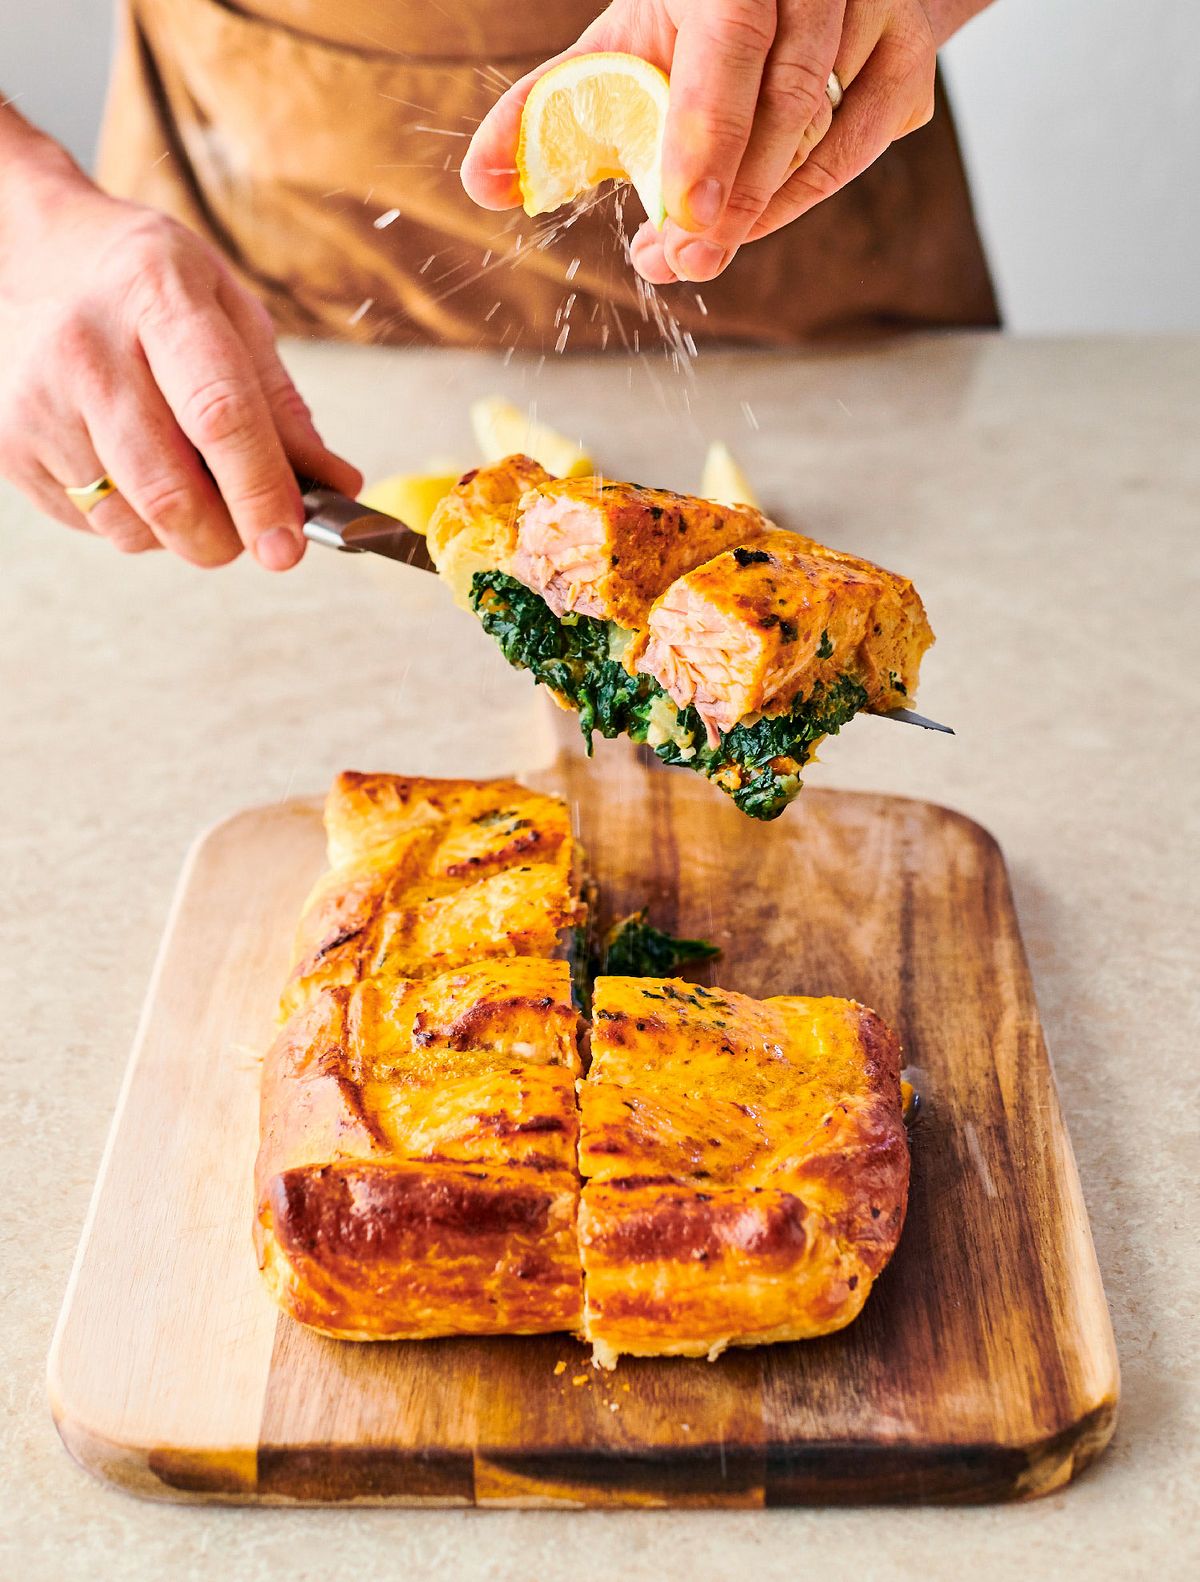 Jamie Oliver’s Easy Salmon en Croute with Tasty Spinach, Baked Red Pesto Sauce and Lemon